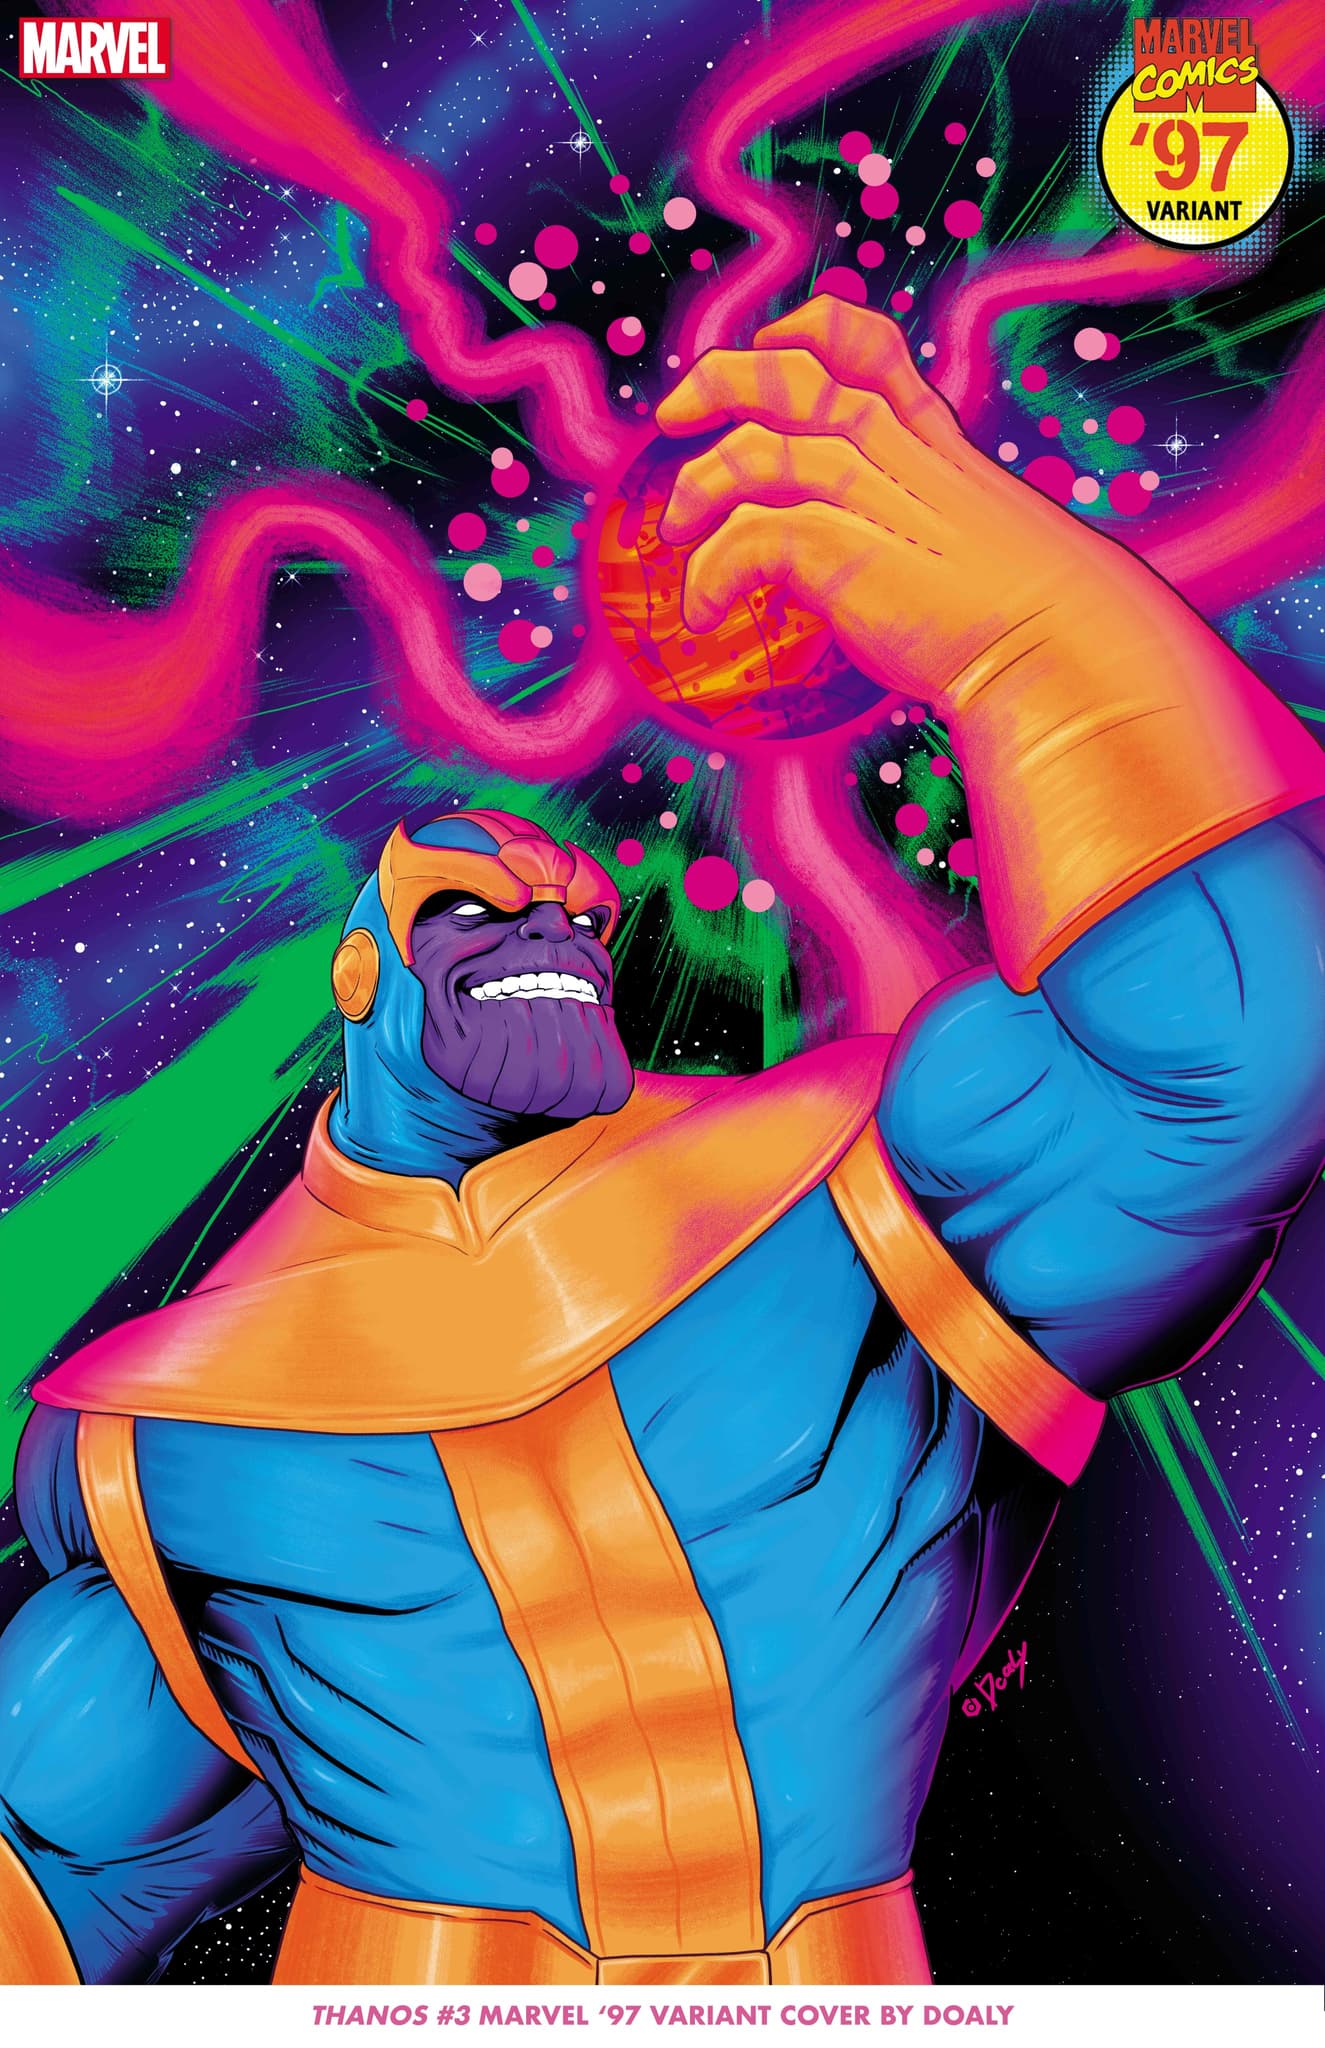 THANOS #3 Marvel ‘97 Variant Cover by Doaly